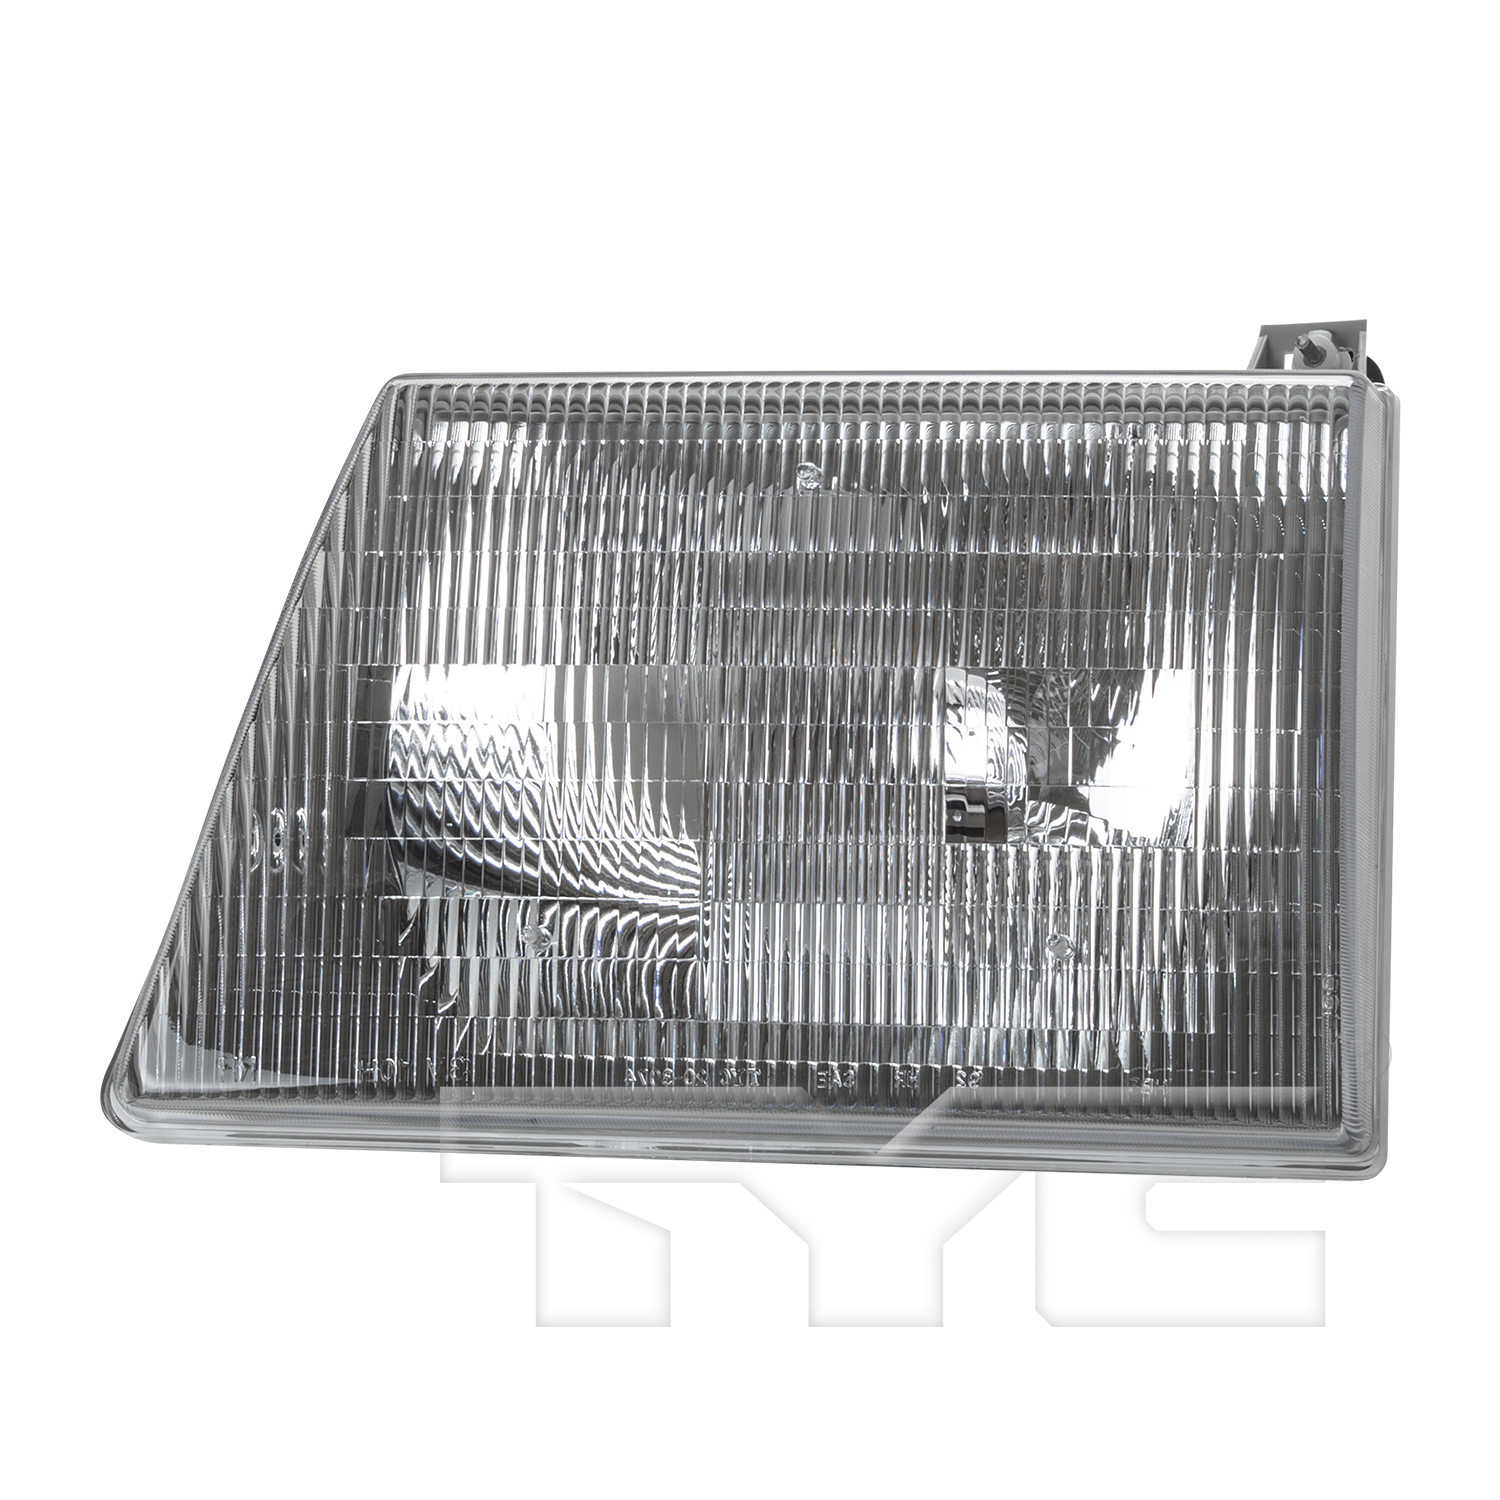 Aftermarket HEADLIGHTS for FORD - E-450 ECONOLINE SUPER DUTY, E-450 ECONOLINE SUPER DUTY,99-02,LT Headlamp assy composite